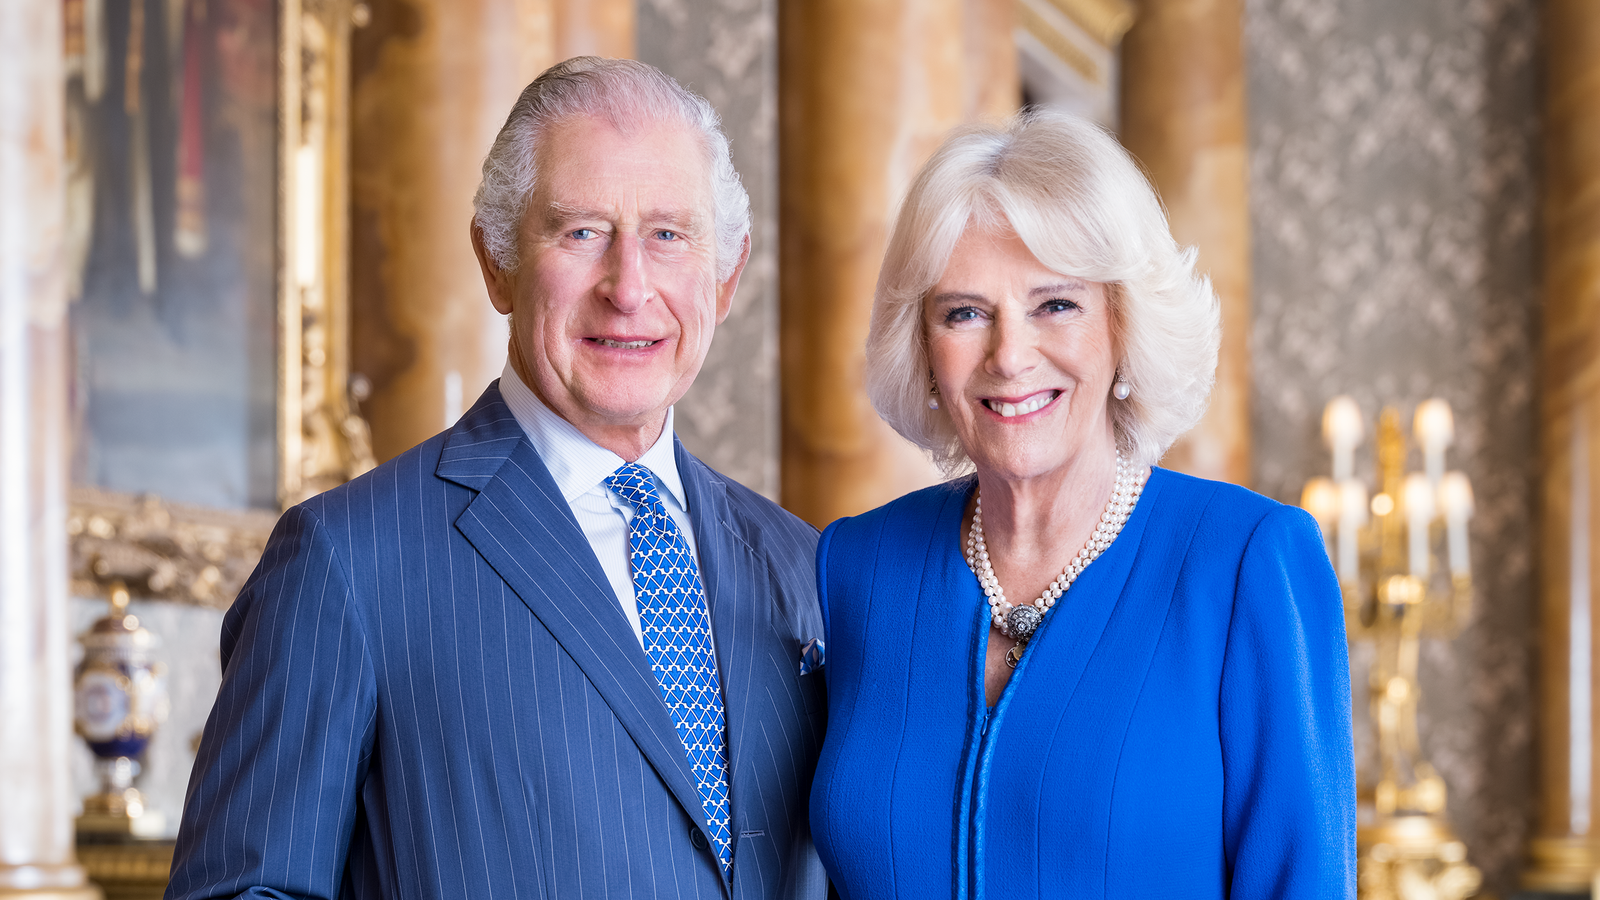 'Queen Camilla' title used officially for the first time on King's coronation invites